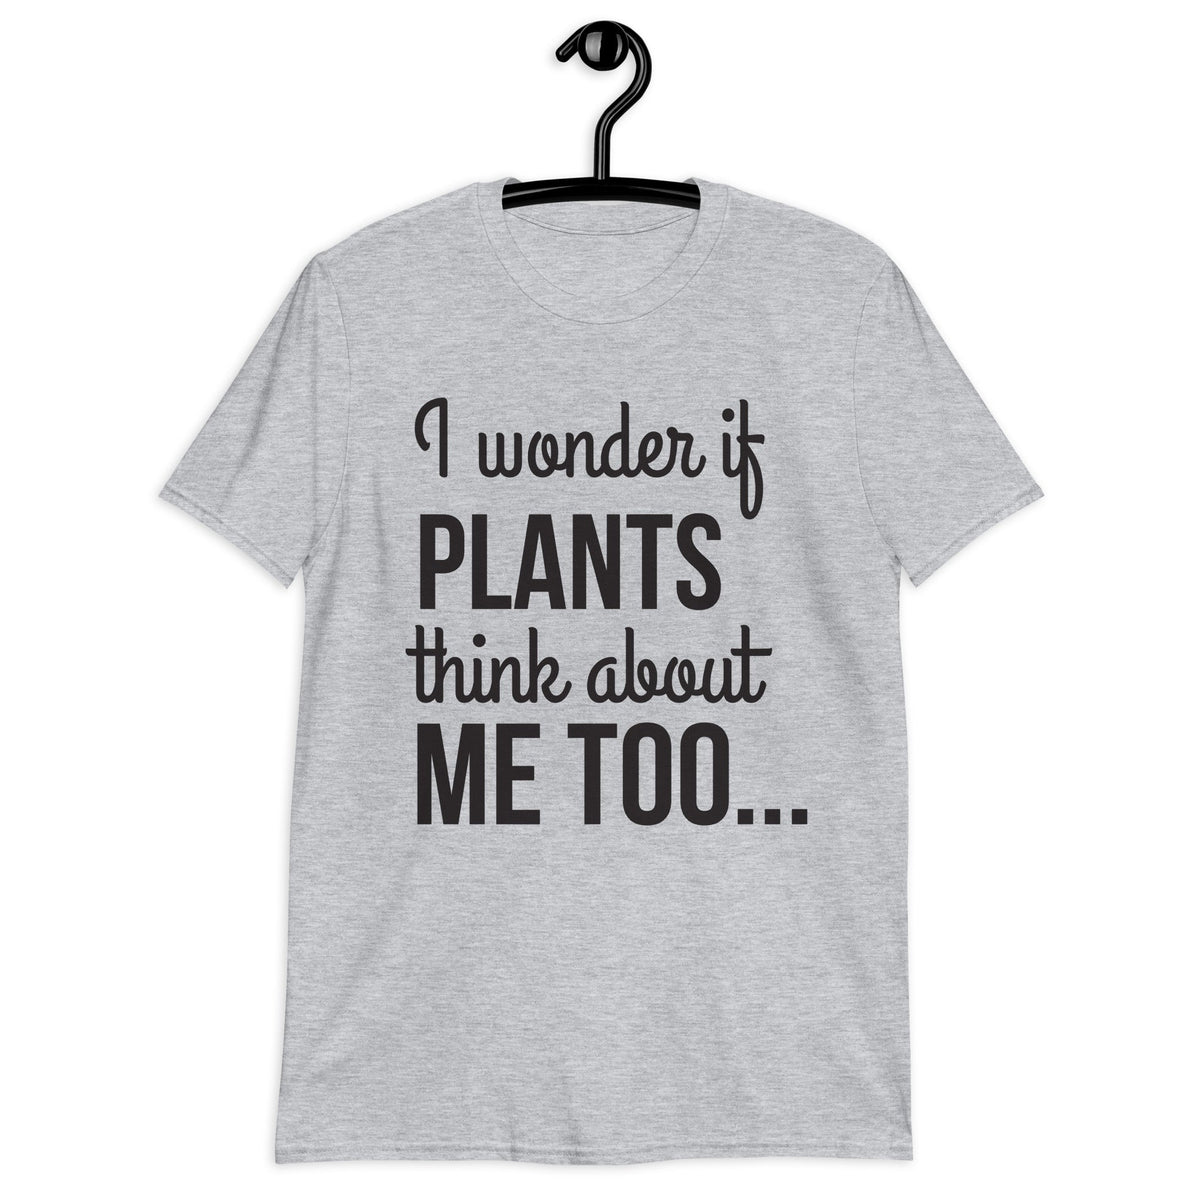 PLANTS THINKS ABOUT ME TOO Short-Sleeve  T-Shirt